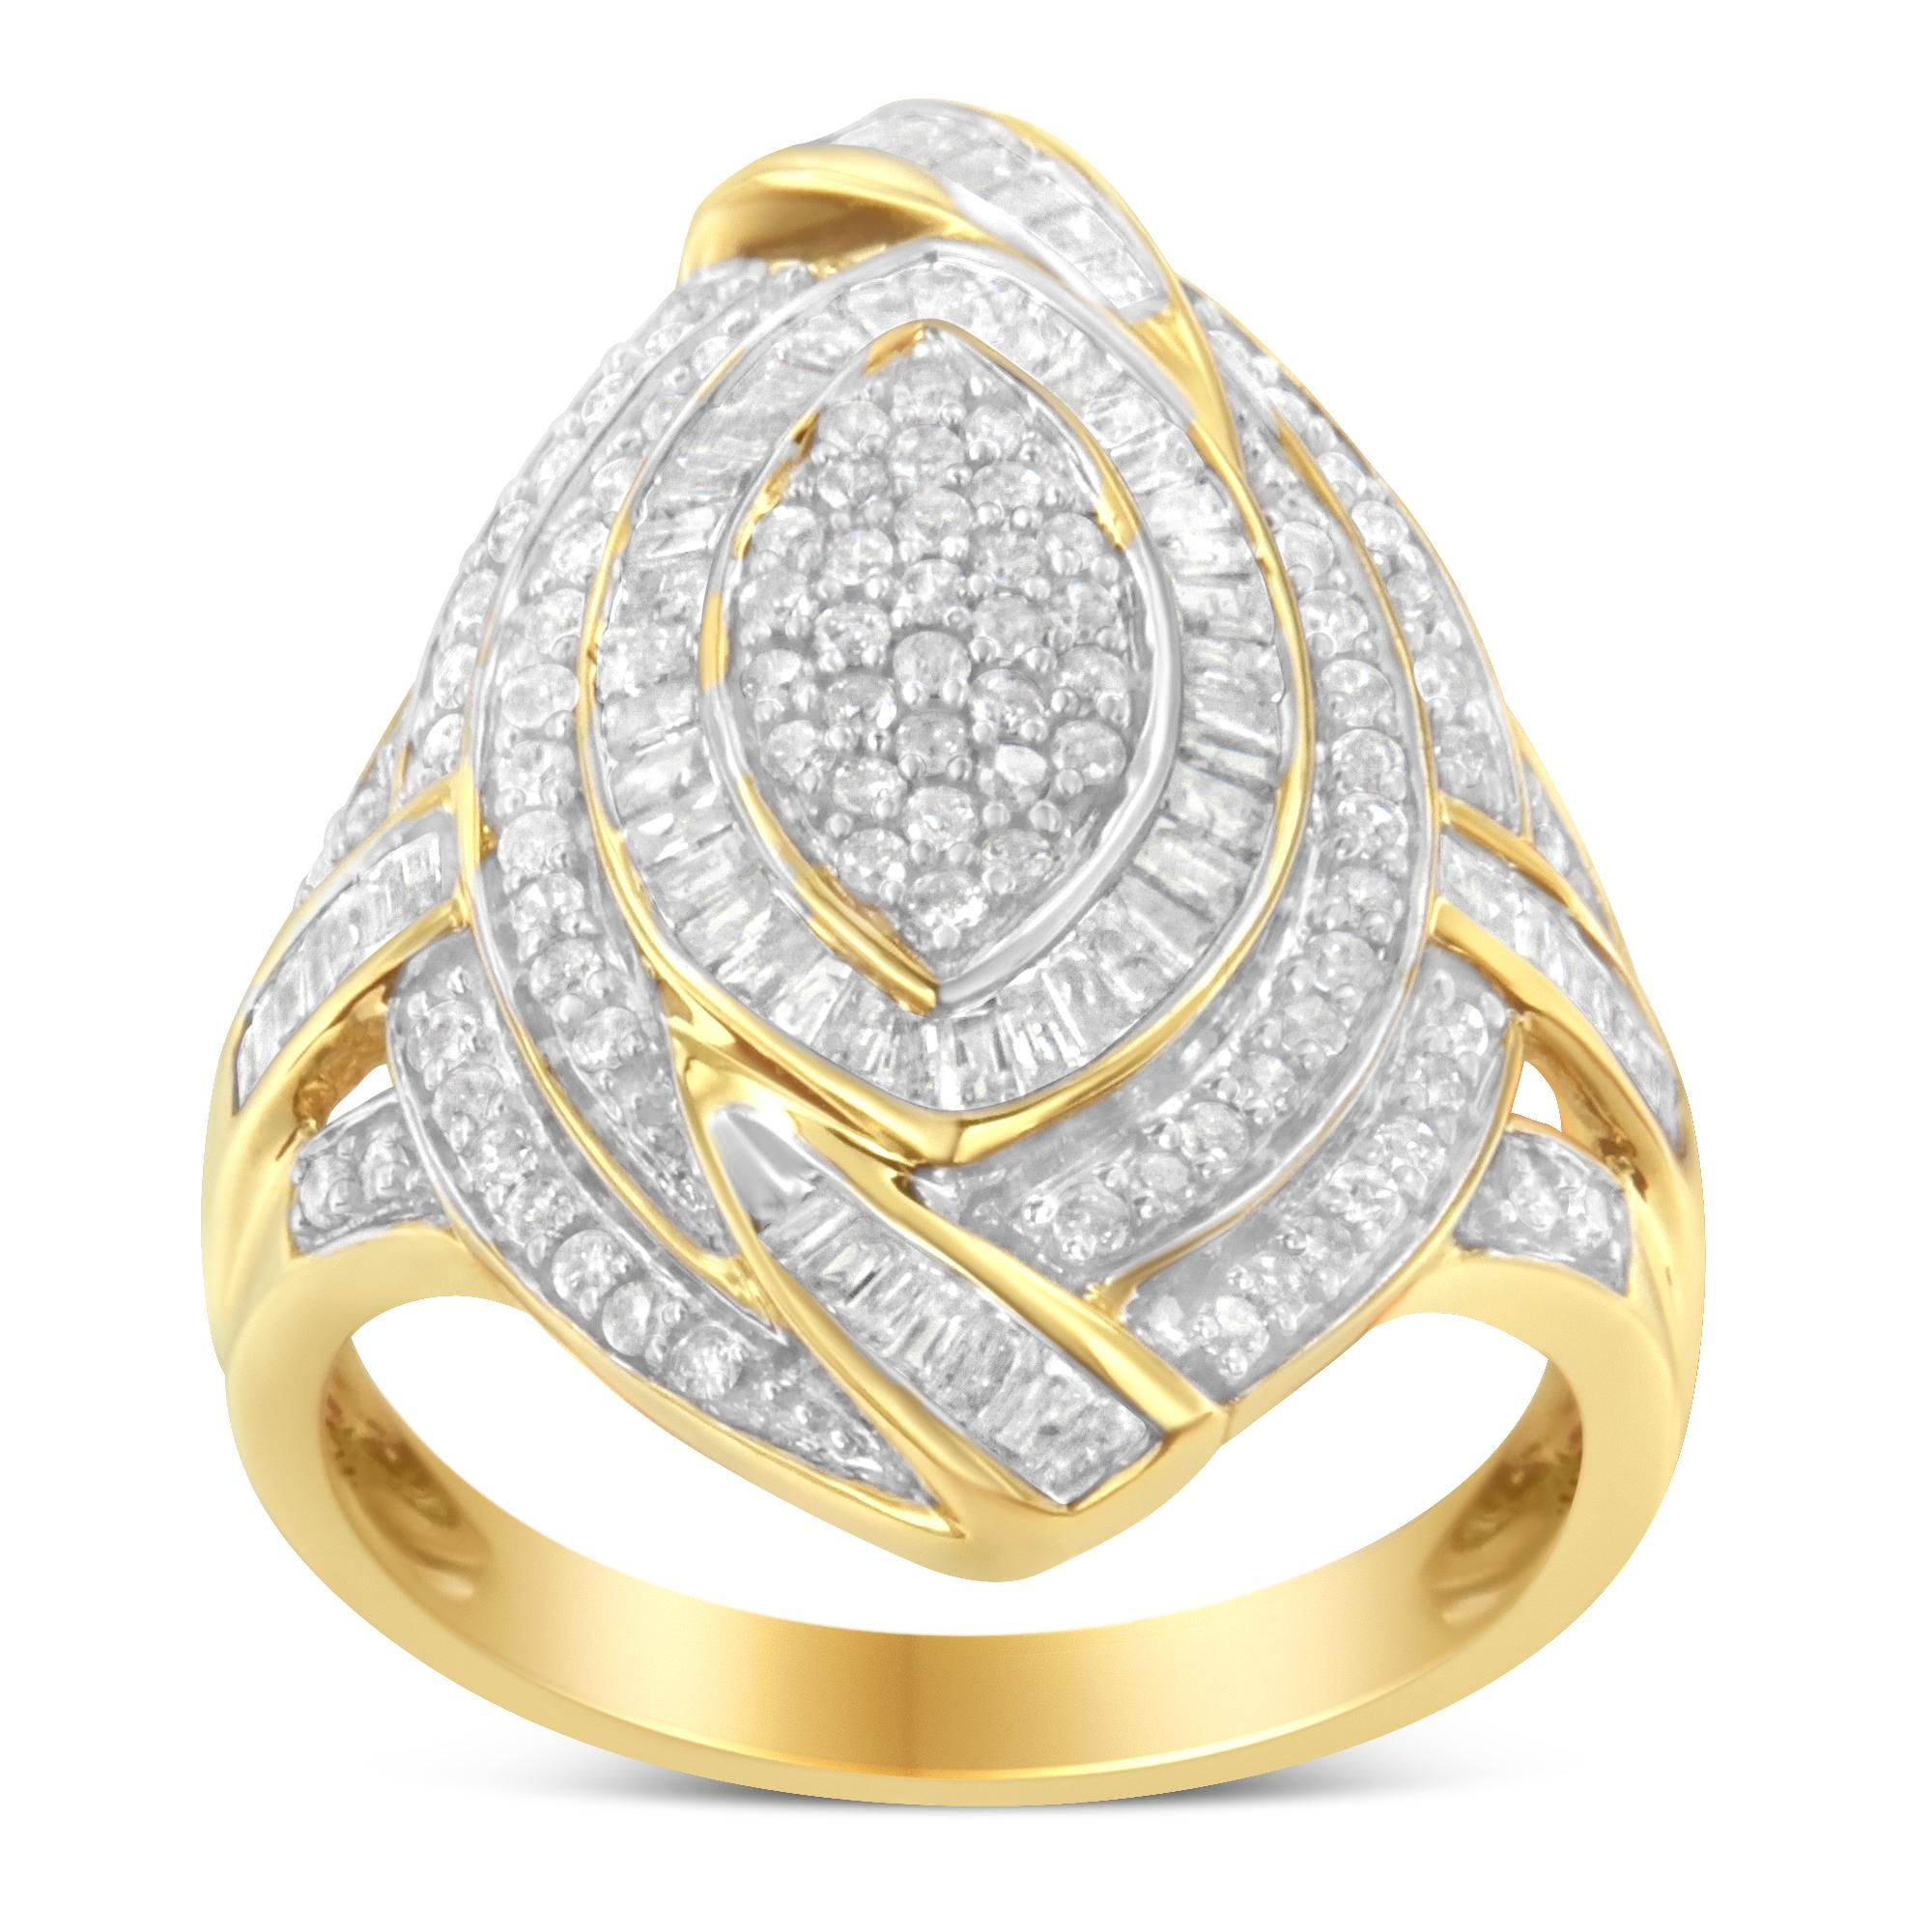 Round Cut 10K Yellow Gold 1.0 Cttw Diamond Cocktail Ring For Sale